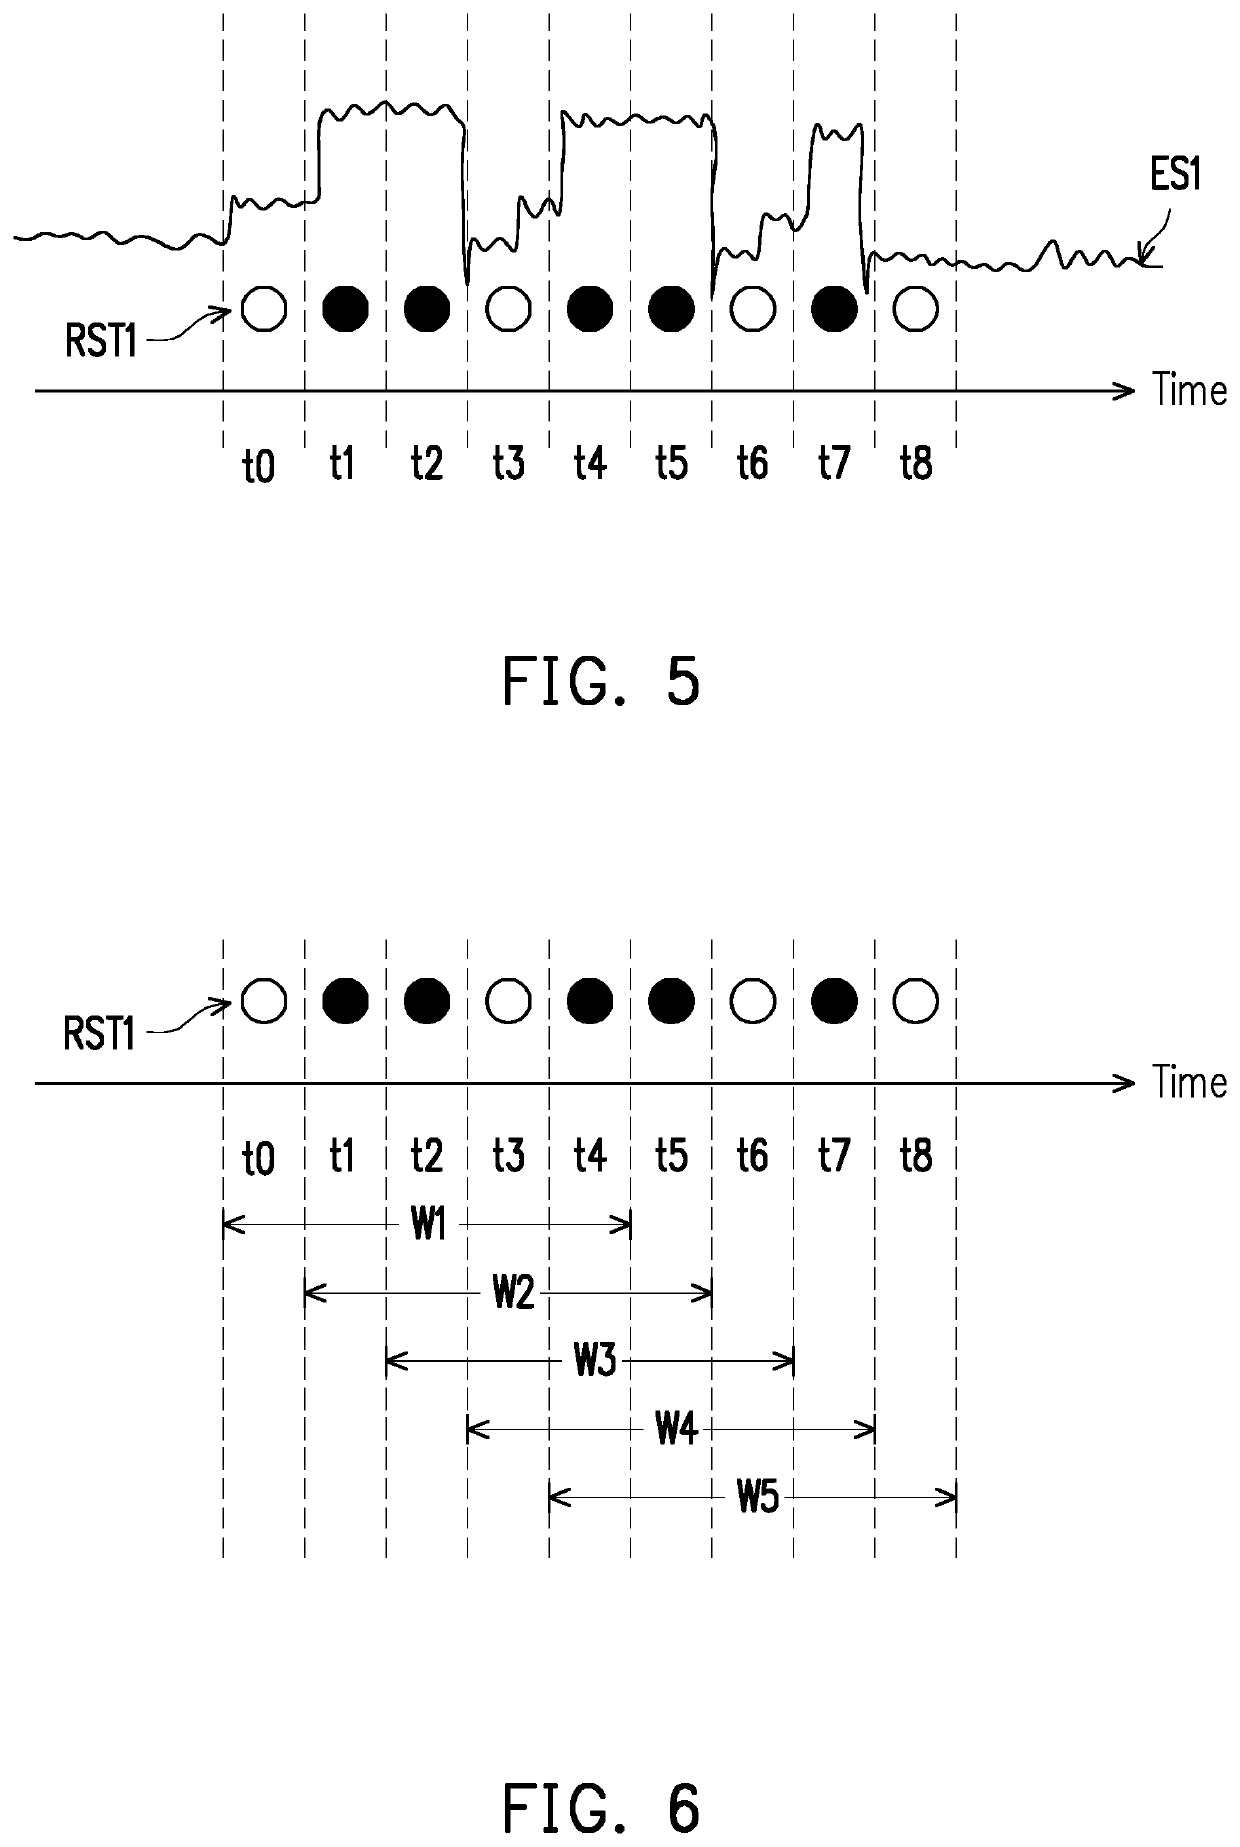 Method and system for neurological event detection